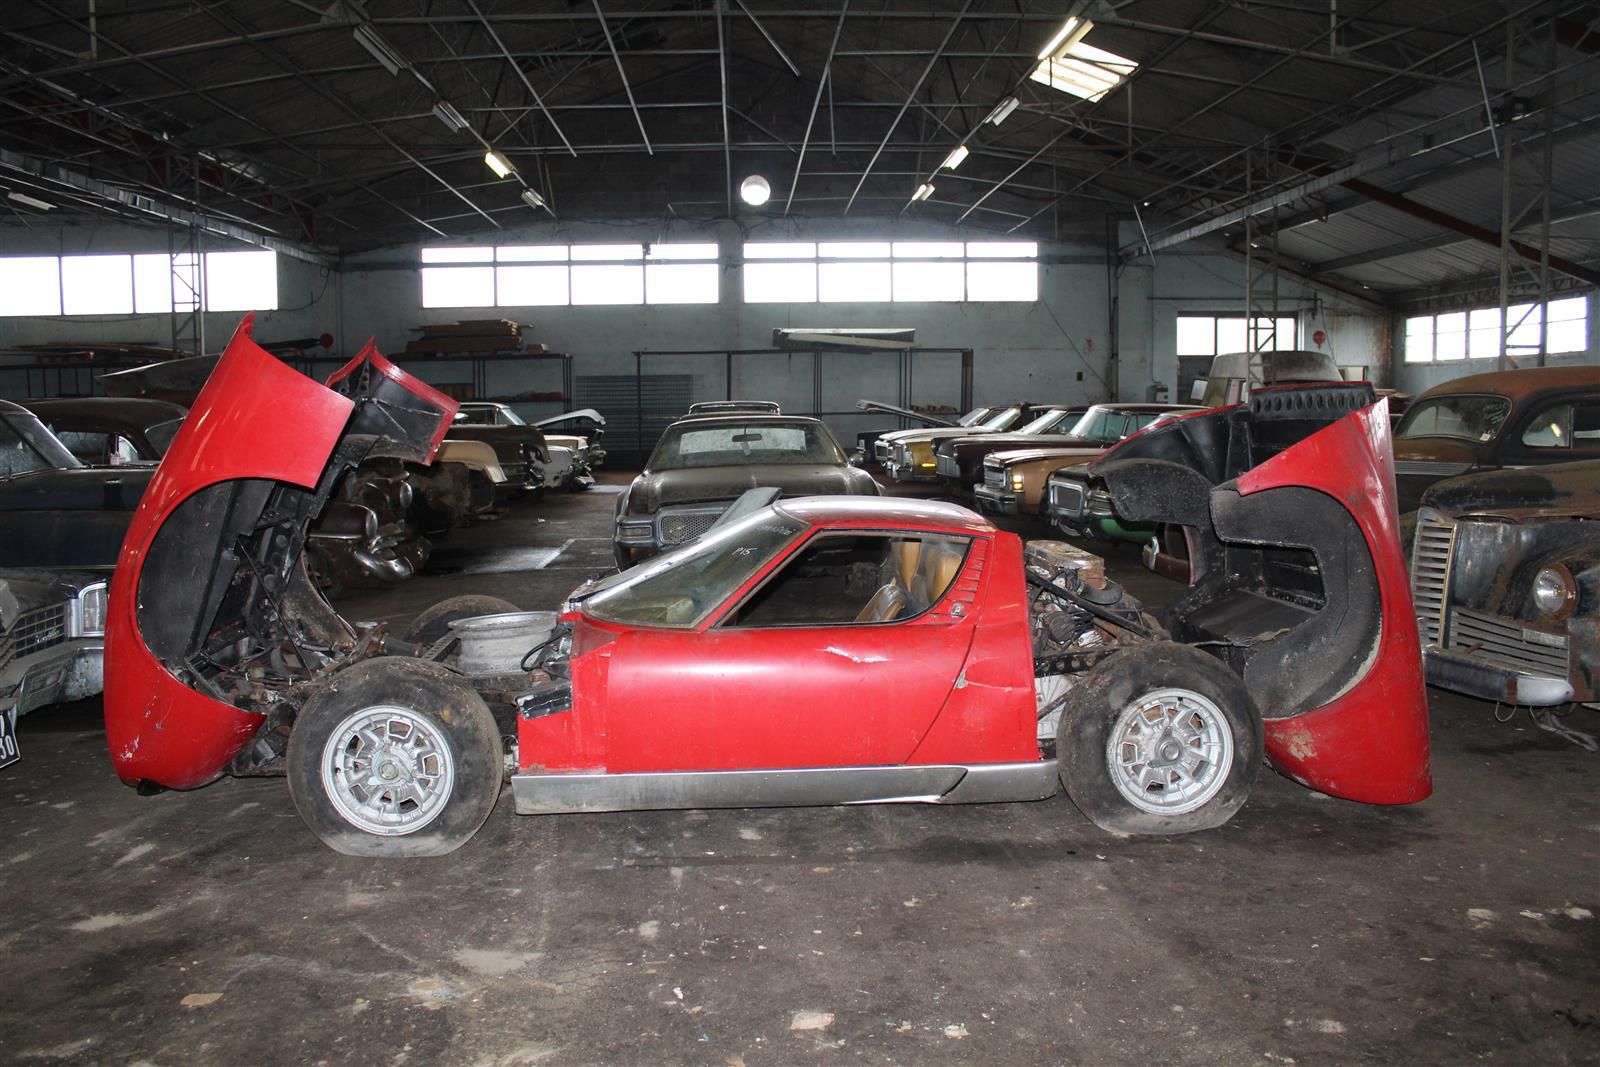 Incredible 81-car French barn-find includes a Miura